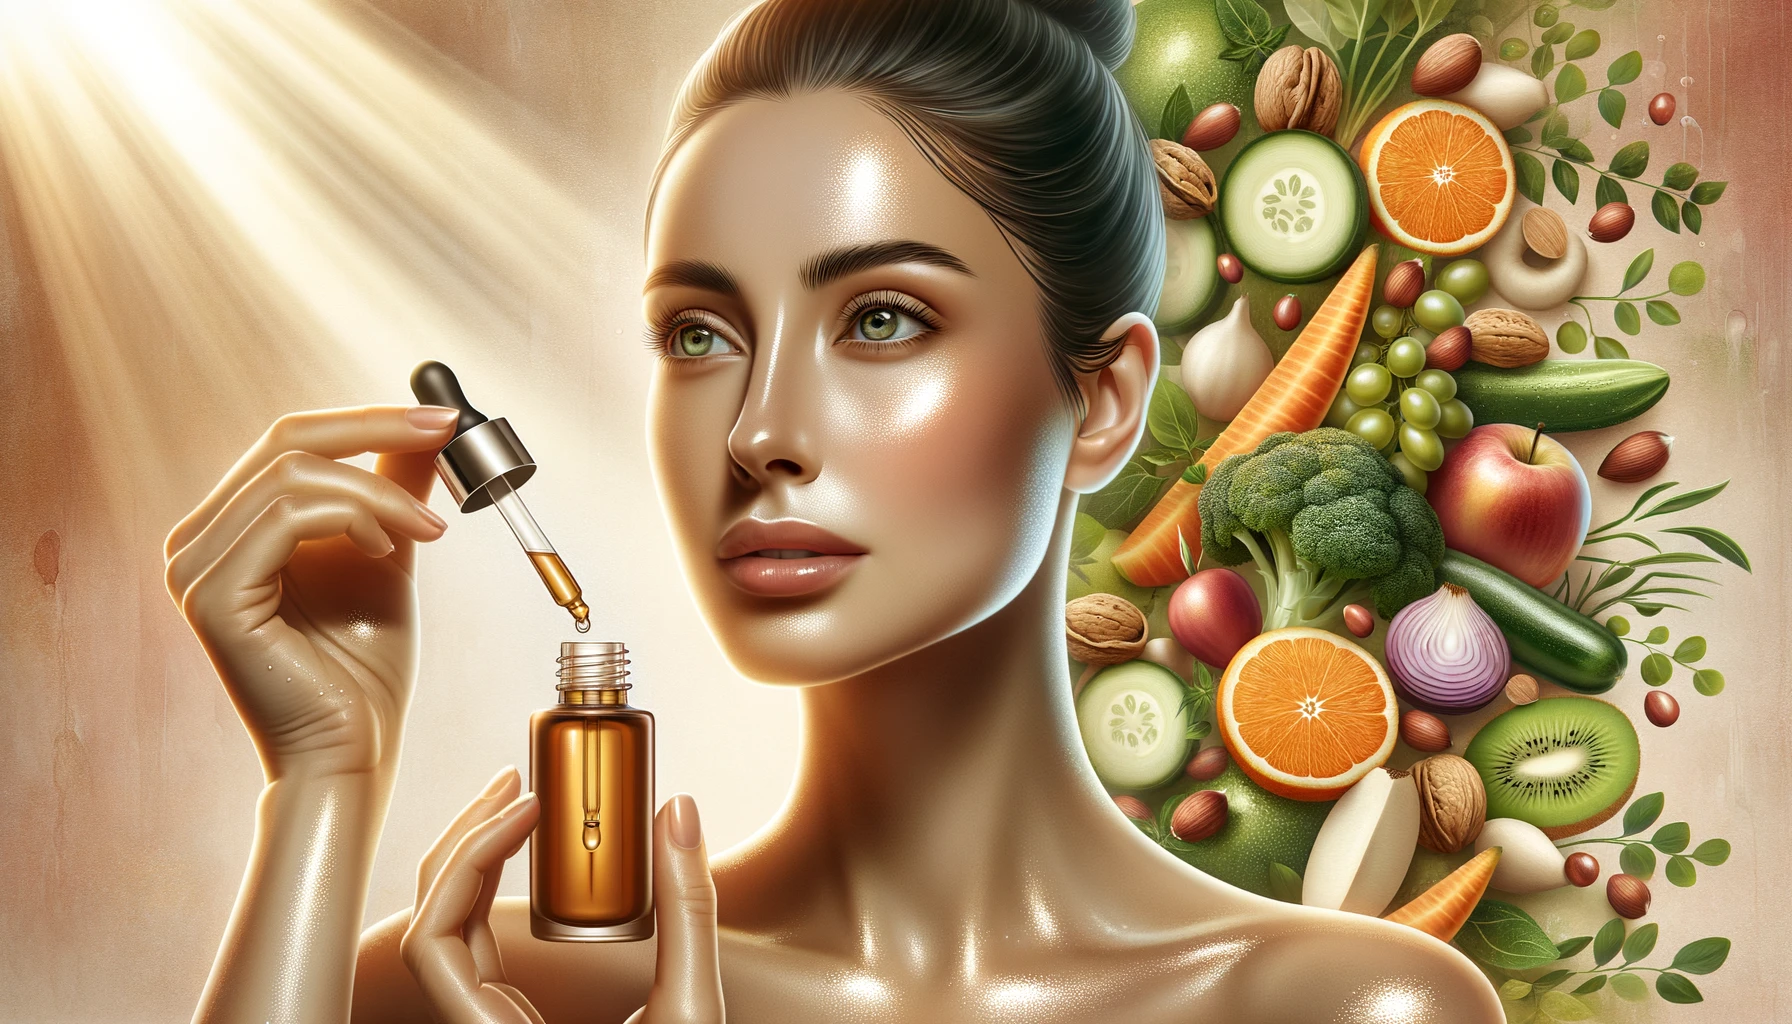 Medium-toned woman applying natural serum derived from fruits, vegetables, and nuts on her skin, with a conceptual background showing the transition of nutrients to skin glow.